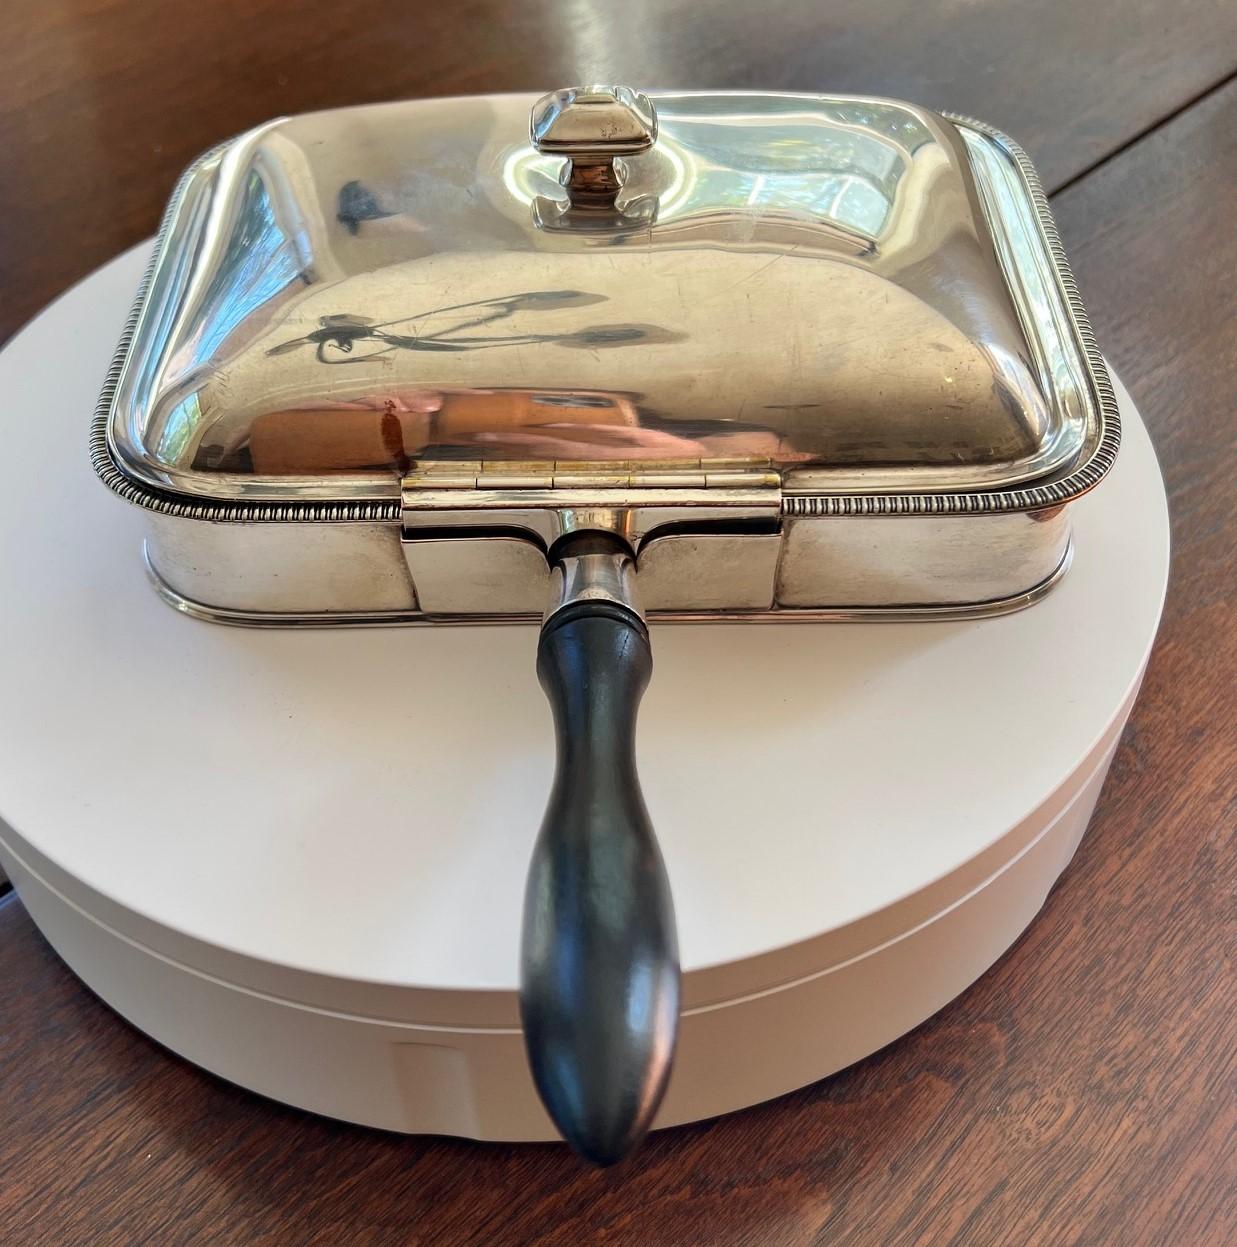 A vintage silver plated English Silent Butler with an ebonised wooden handle. The lid, engraved with a lion, raises to show a rectangular recessed receptacle. The hollow space underneath the recess allows for the safe collection of hot debris such